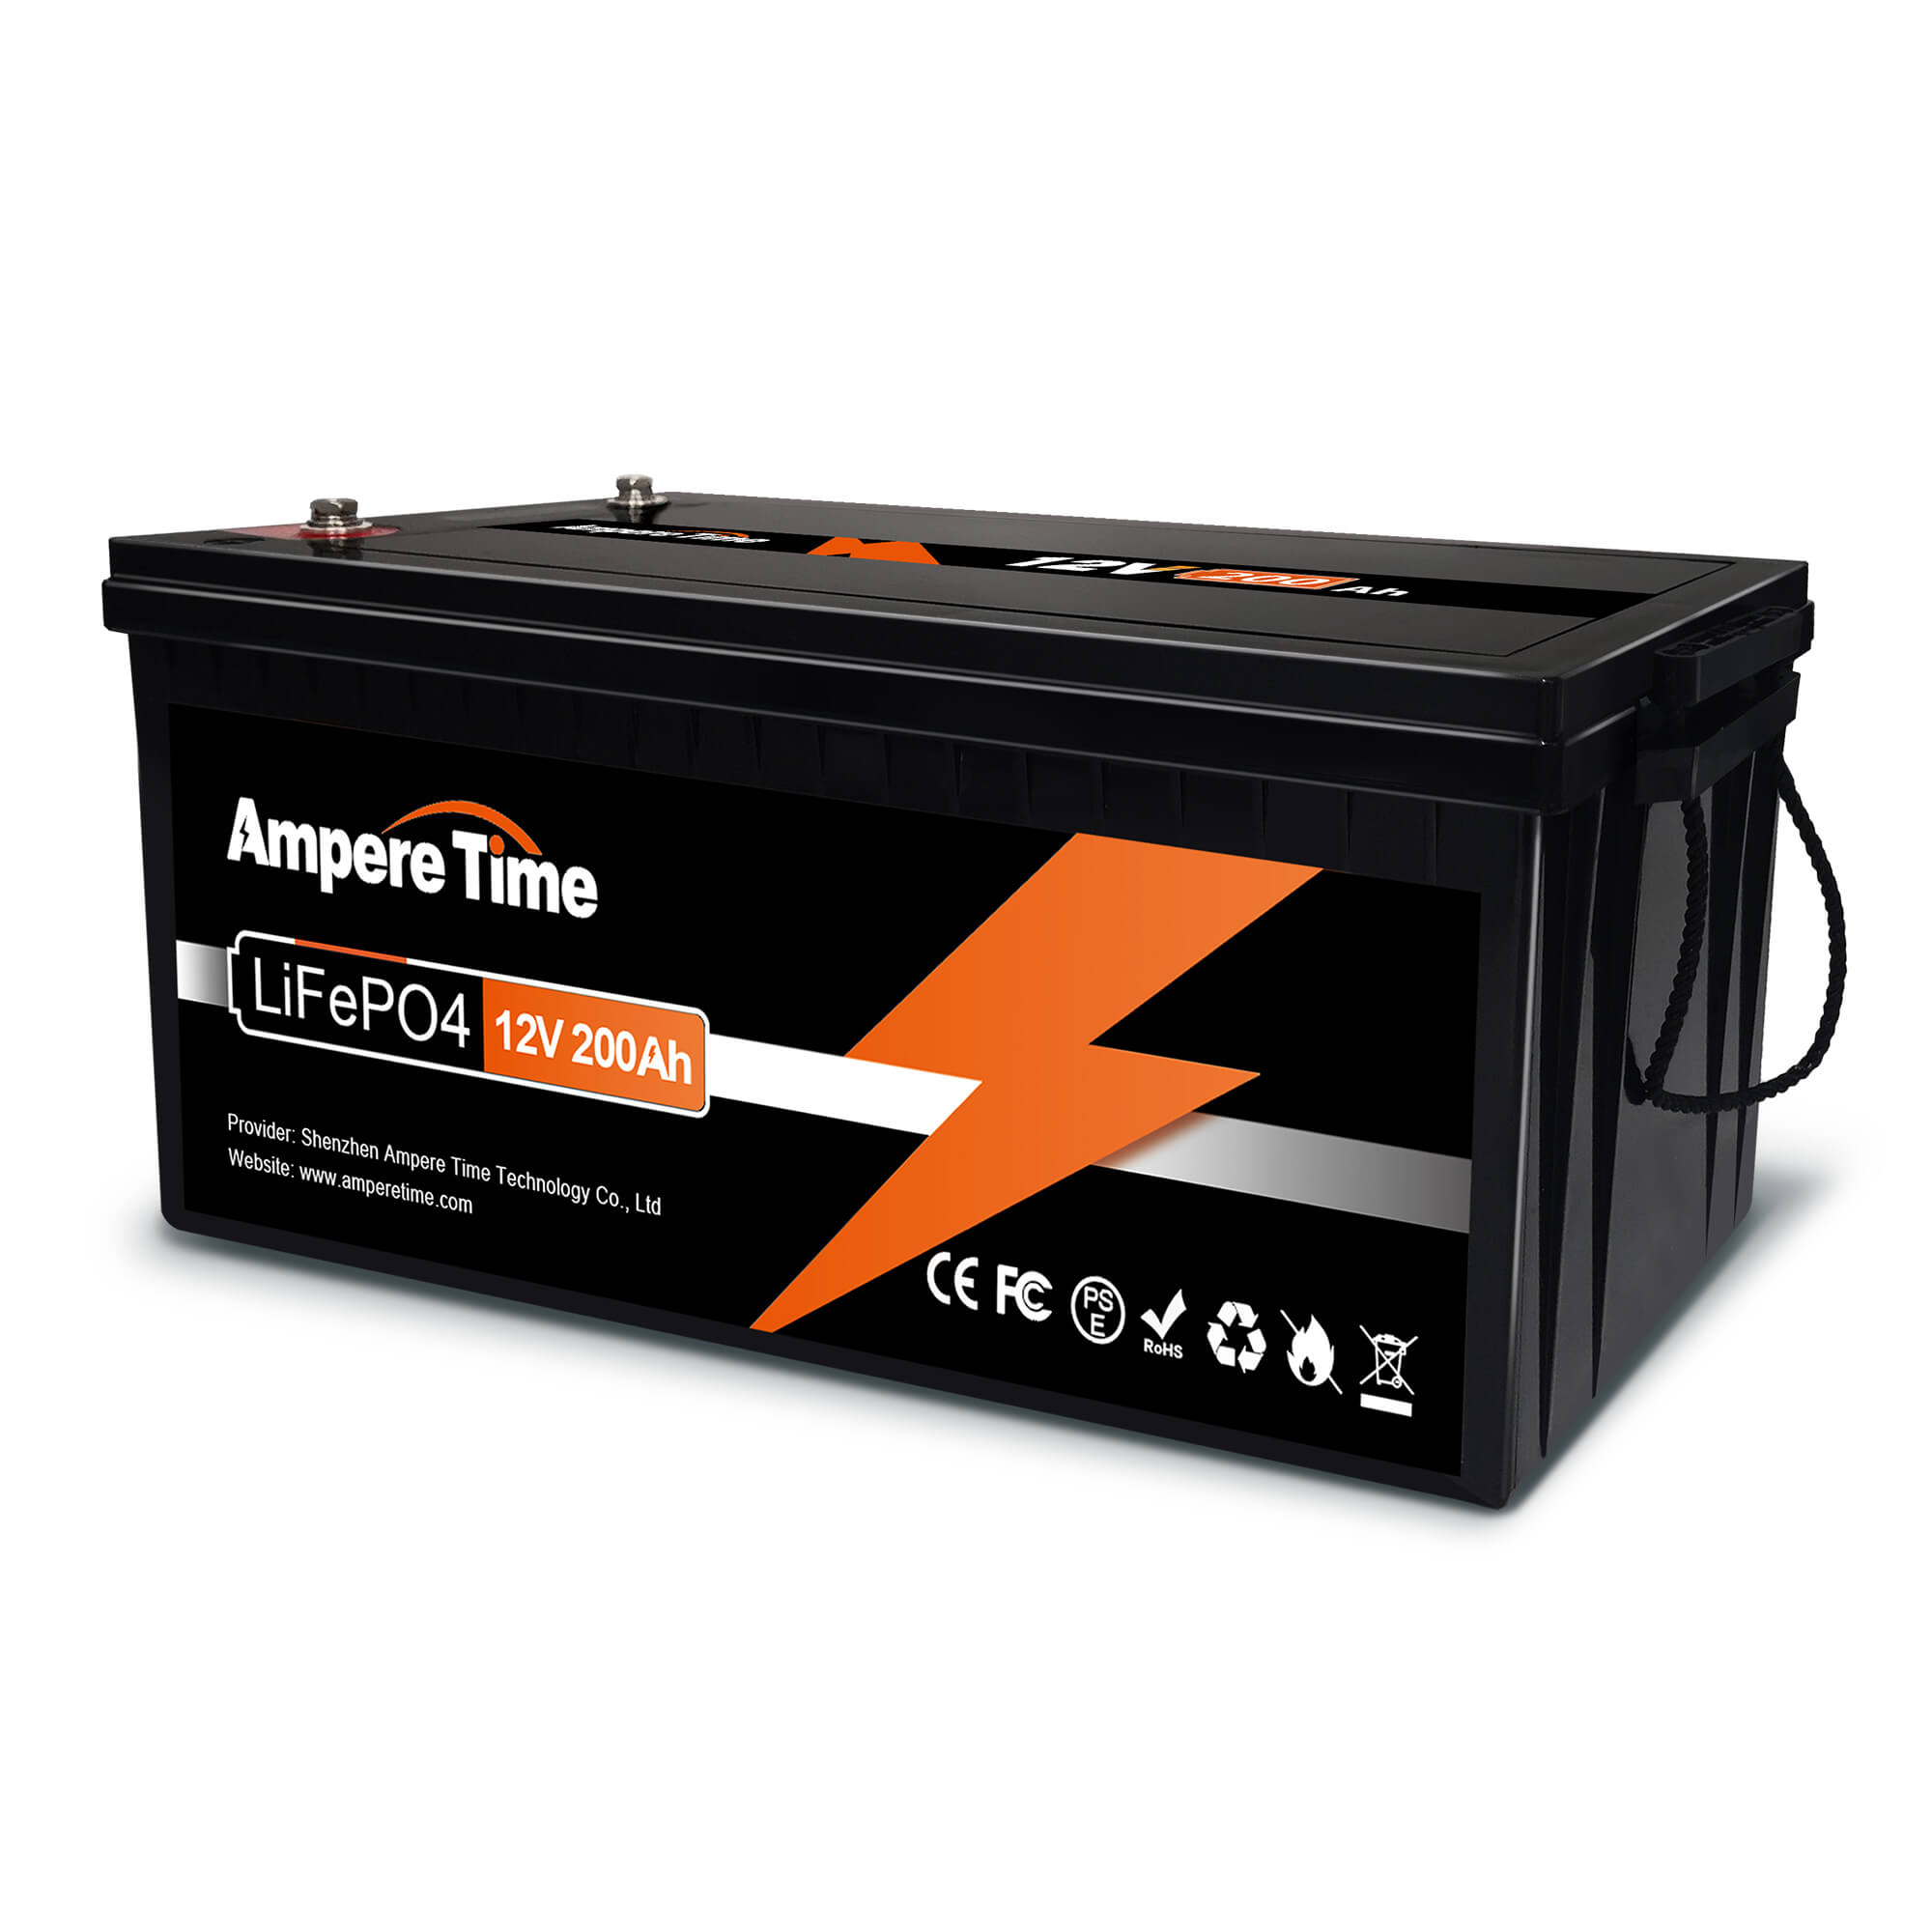 Ampere Time 12V 200Ah Lithium LiFePO4 Battery Ampere Time